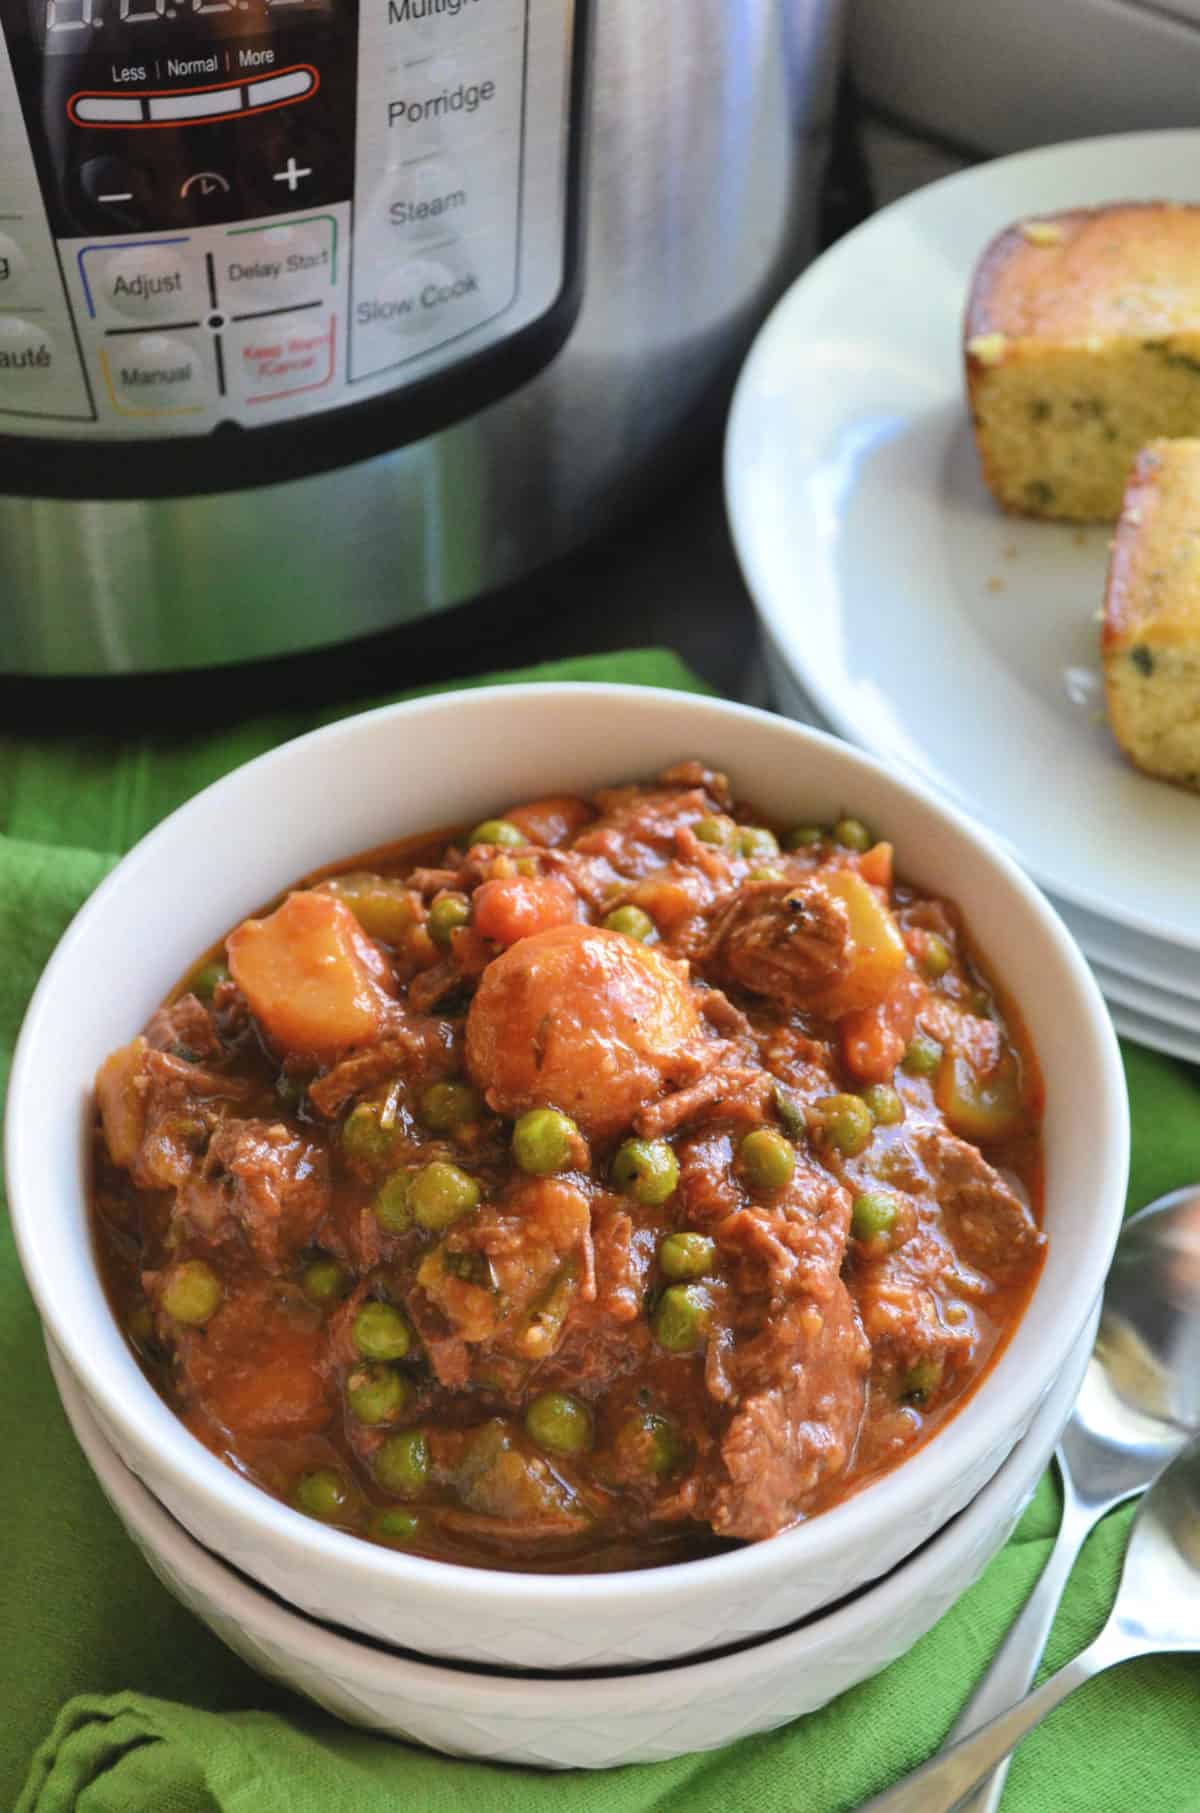 Bowl of beef stew with visible potatoes, peas, and carrots in front of instant pot and corn bread.